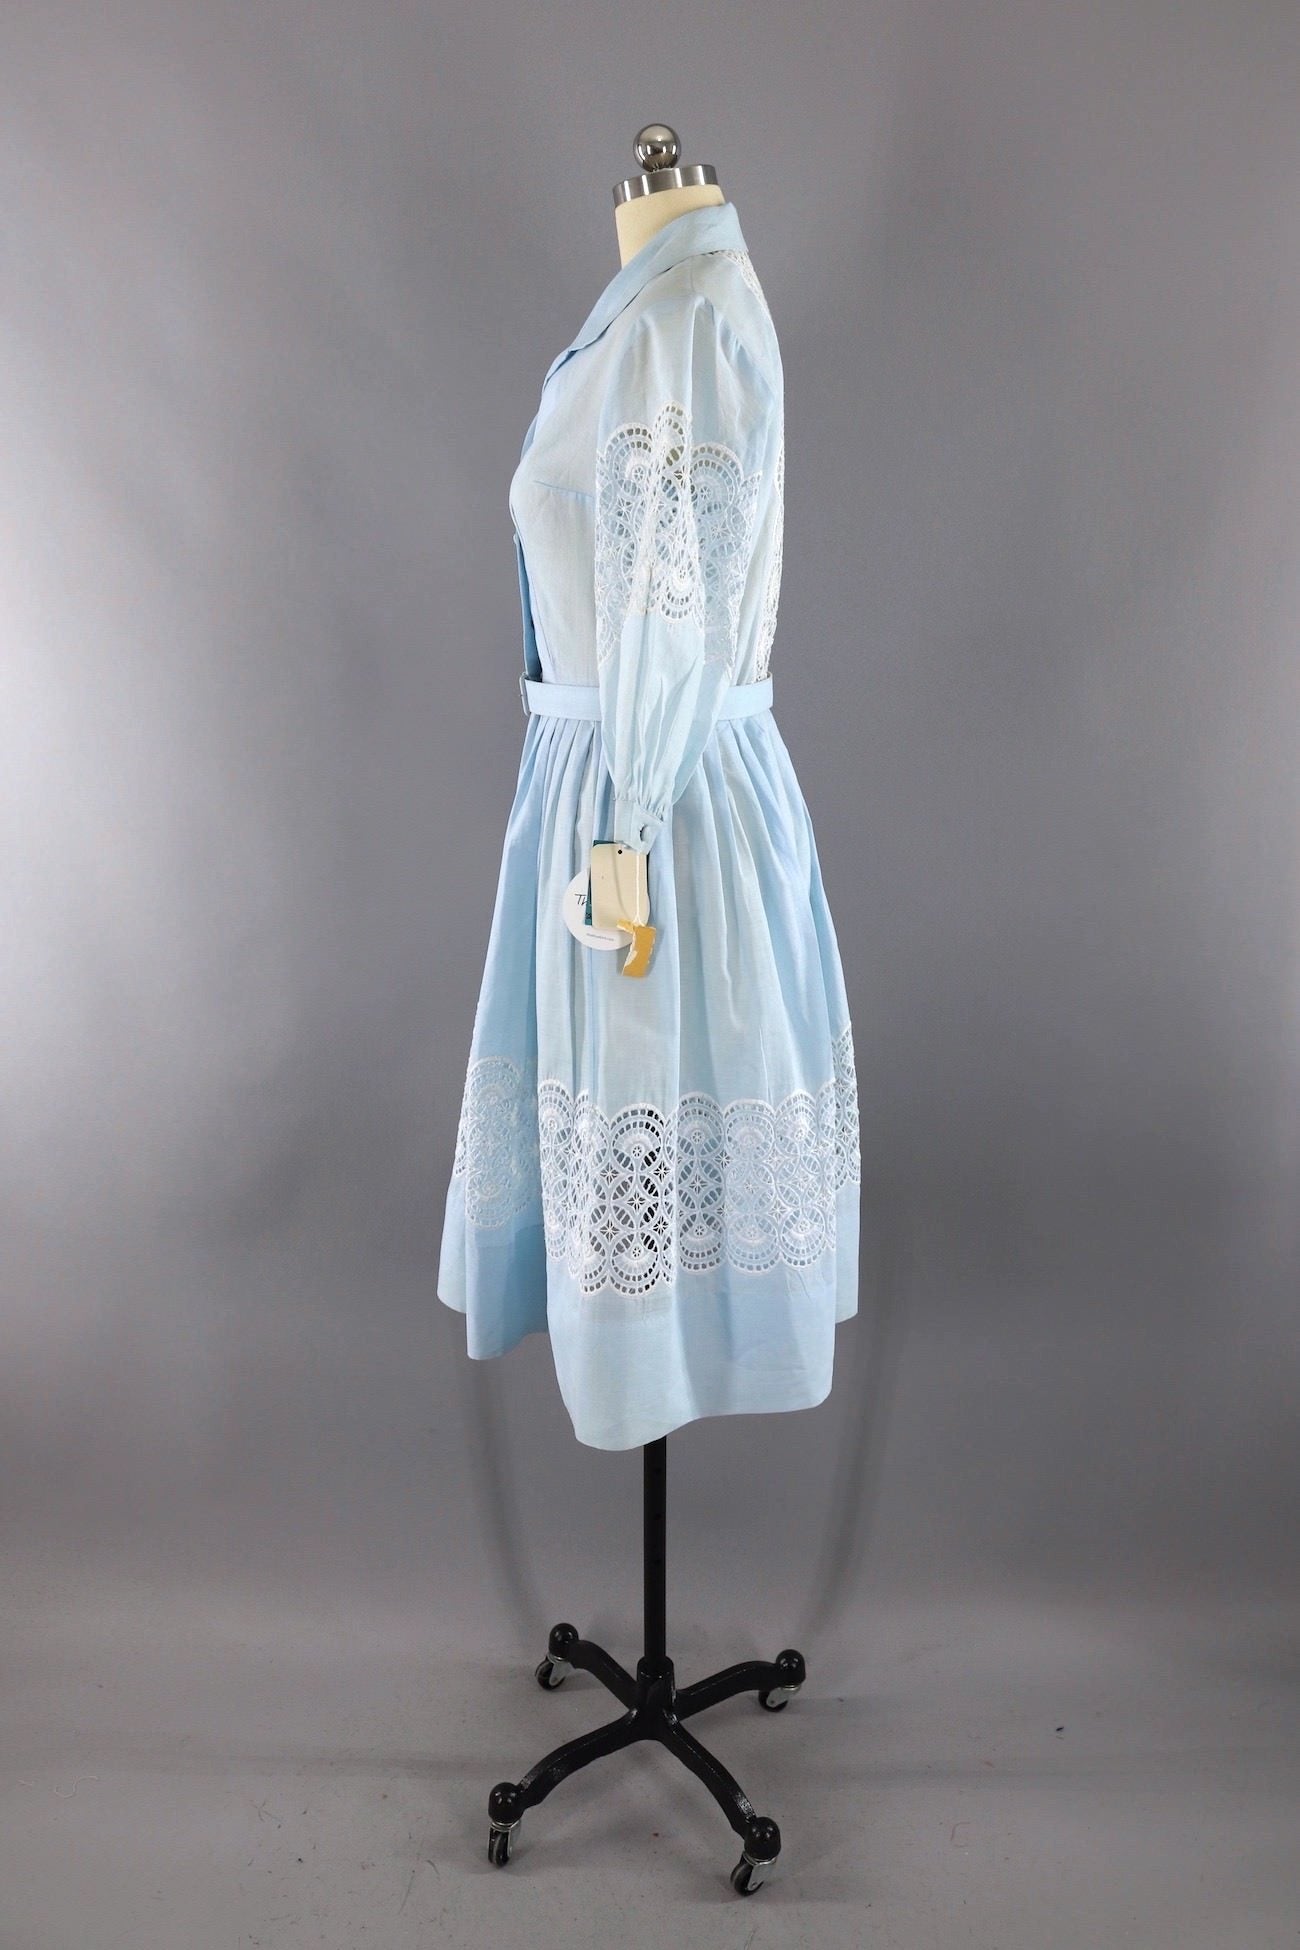 Vintage 1950s Sky Blue Cotton Lace Day Dress / Deadstock NOS Original Tags - ThisBlueBird